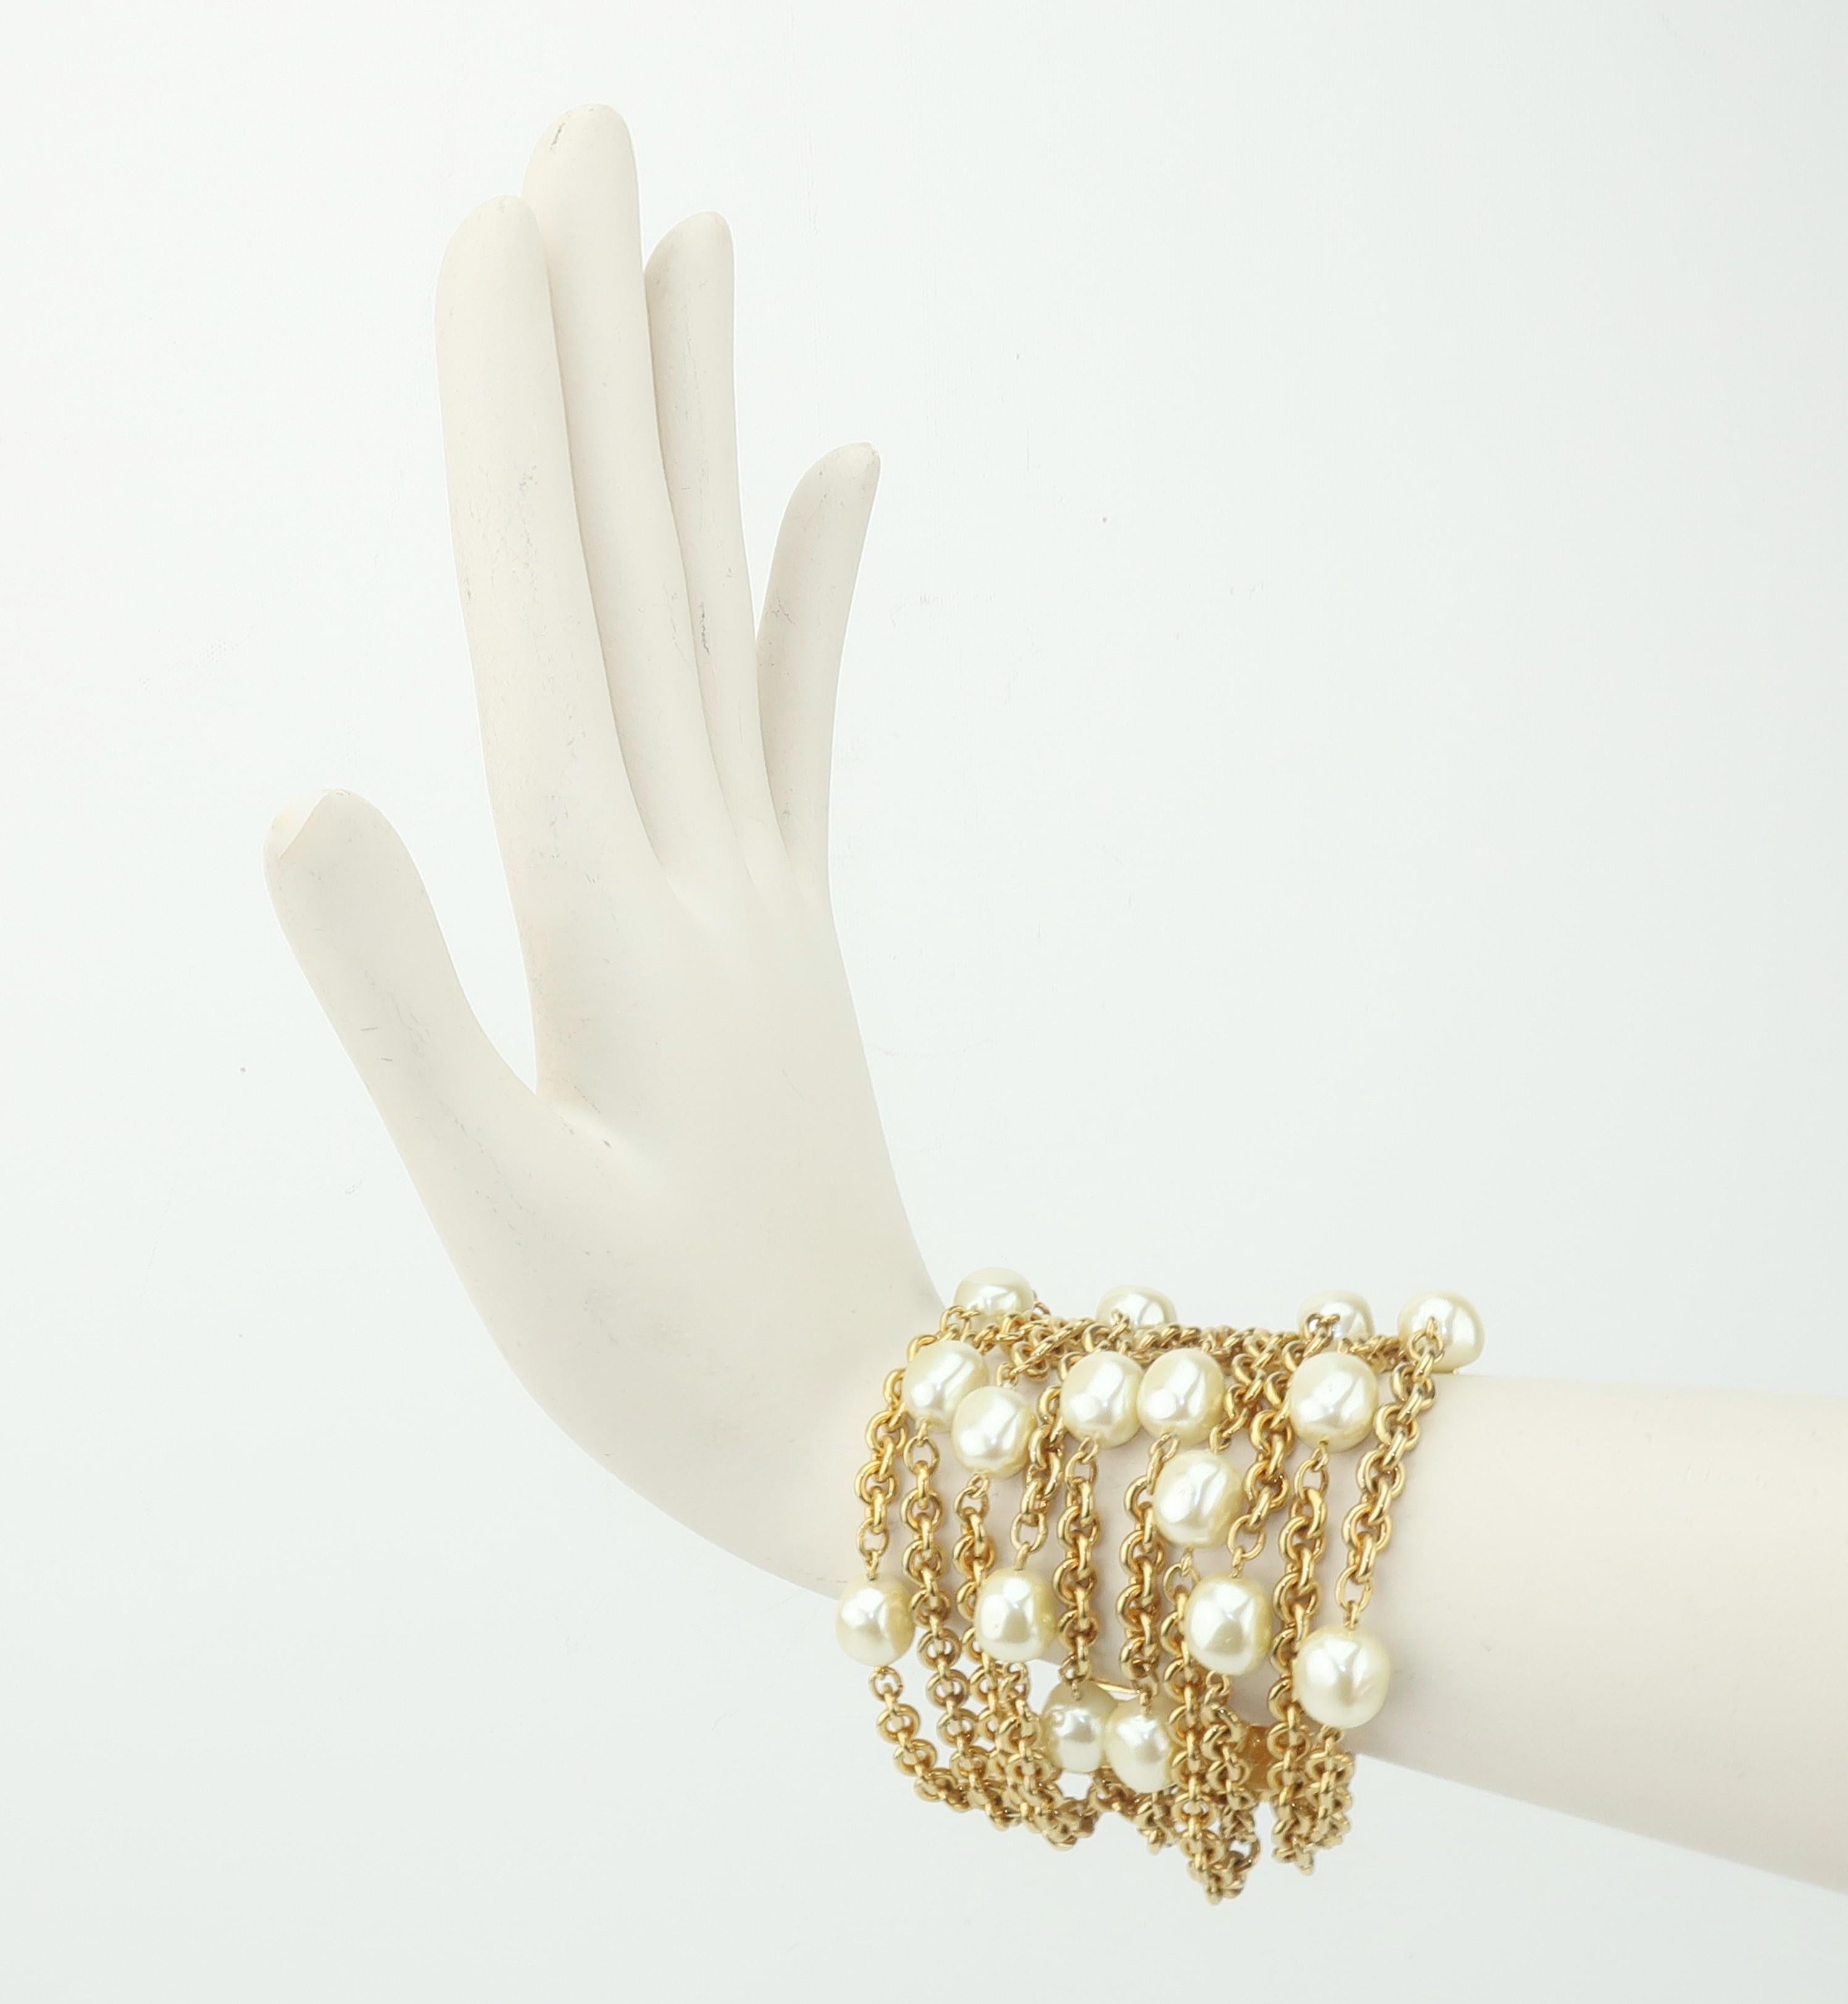 Carolee has been a trendsetting costume jewelry company since the 1970’s.  This 1980's chunky gold tone multi chain bracelet is accented by large faux pearls creating a stylish statement ... with a nod to Chanel designs.  The bar slide clasp has a